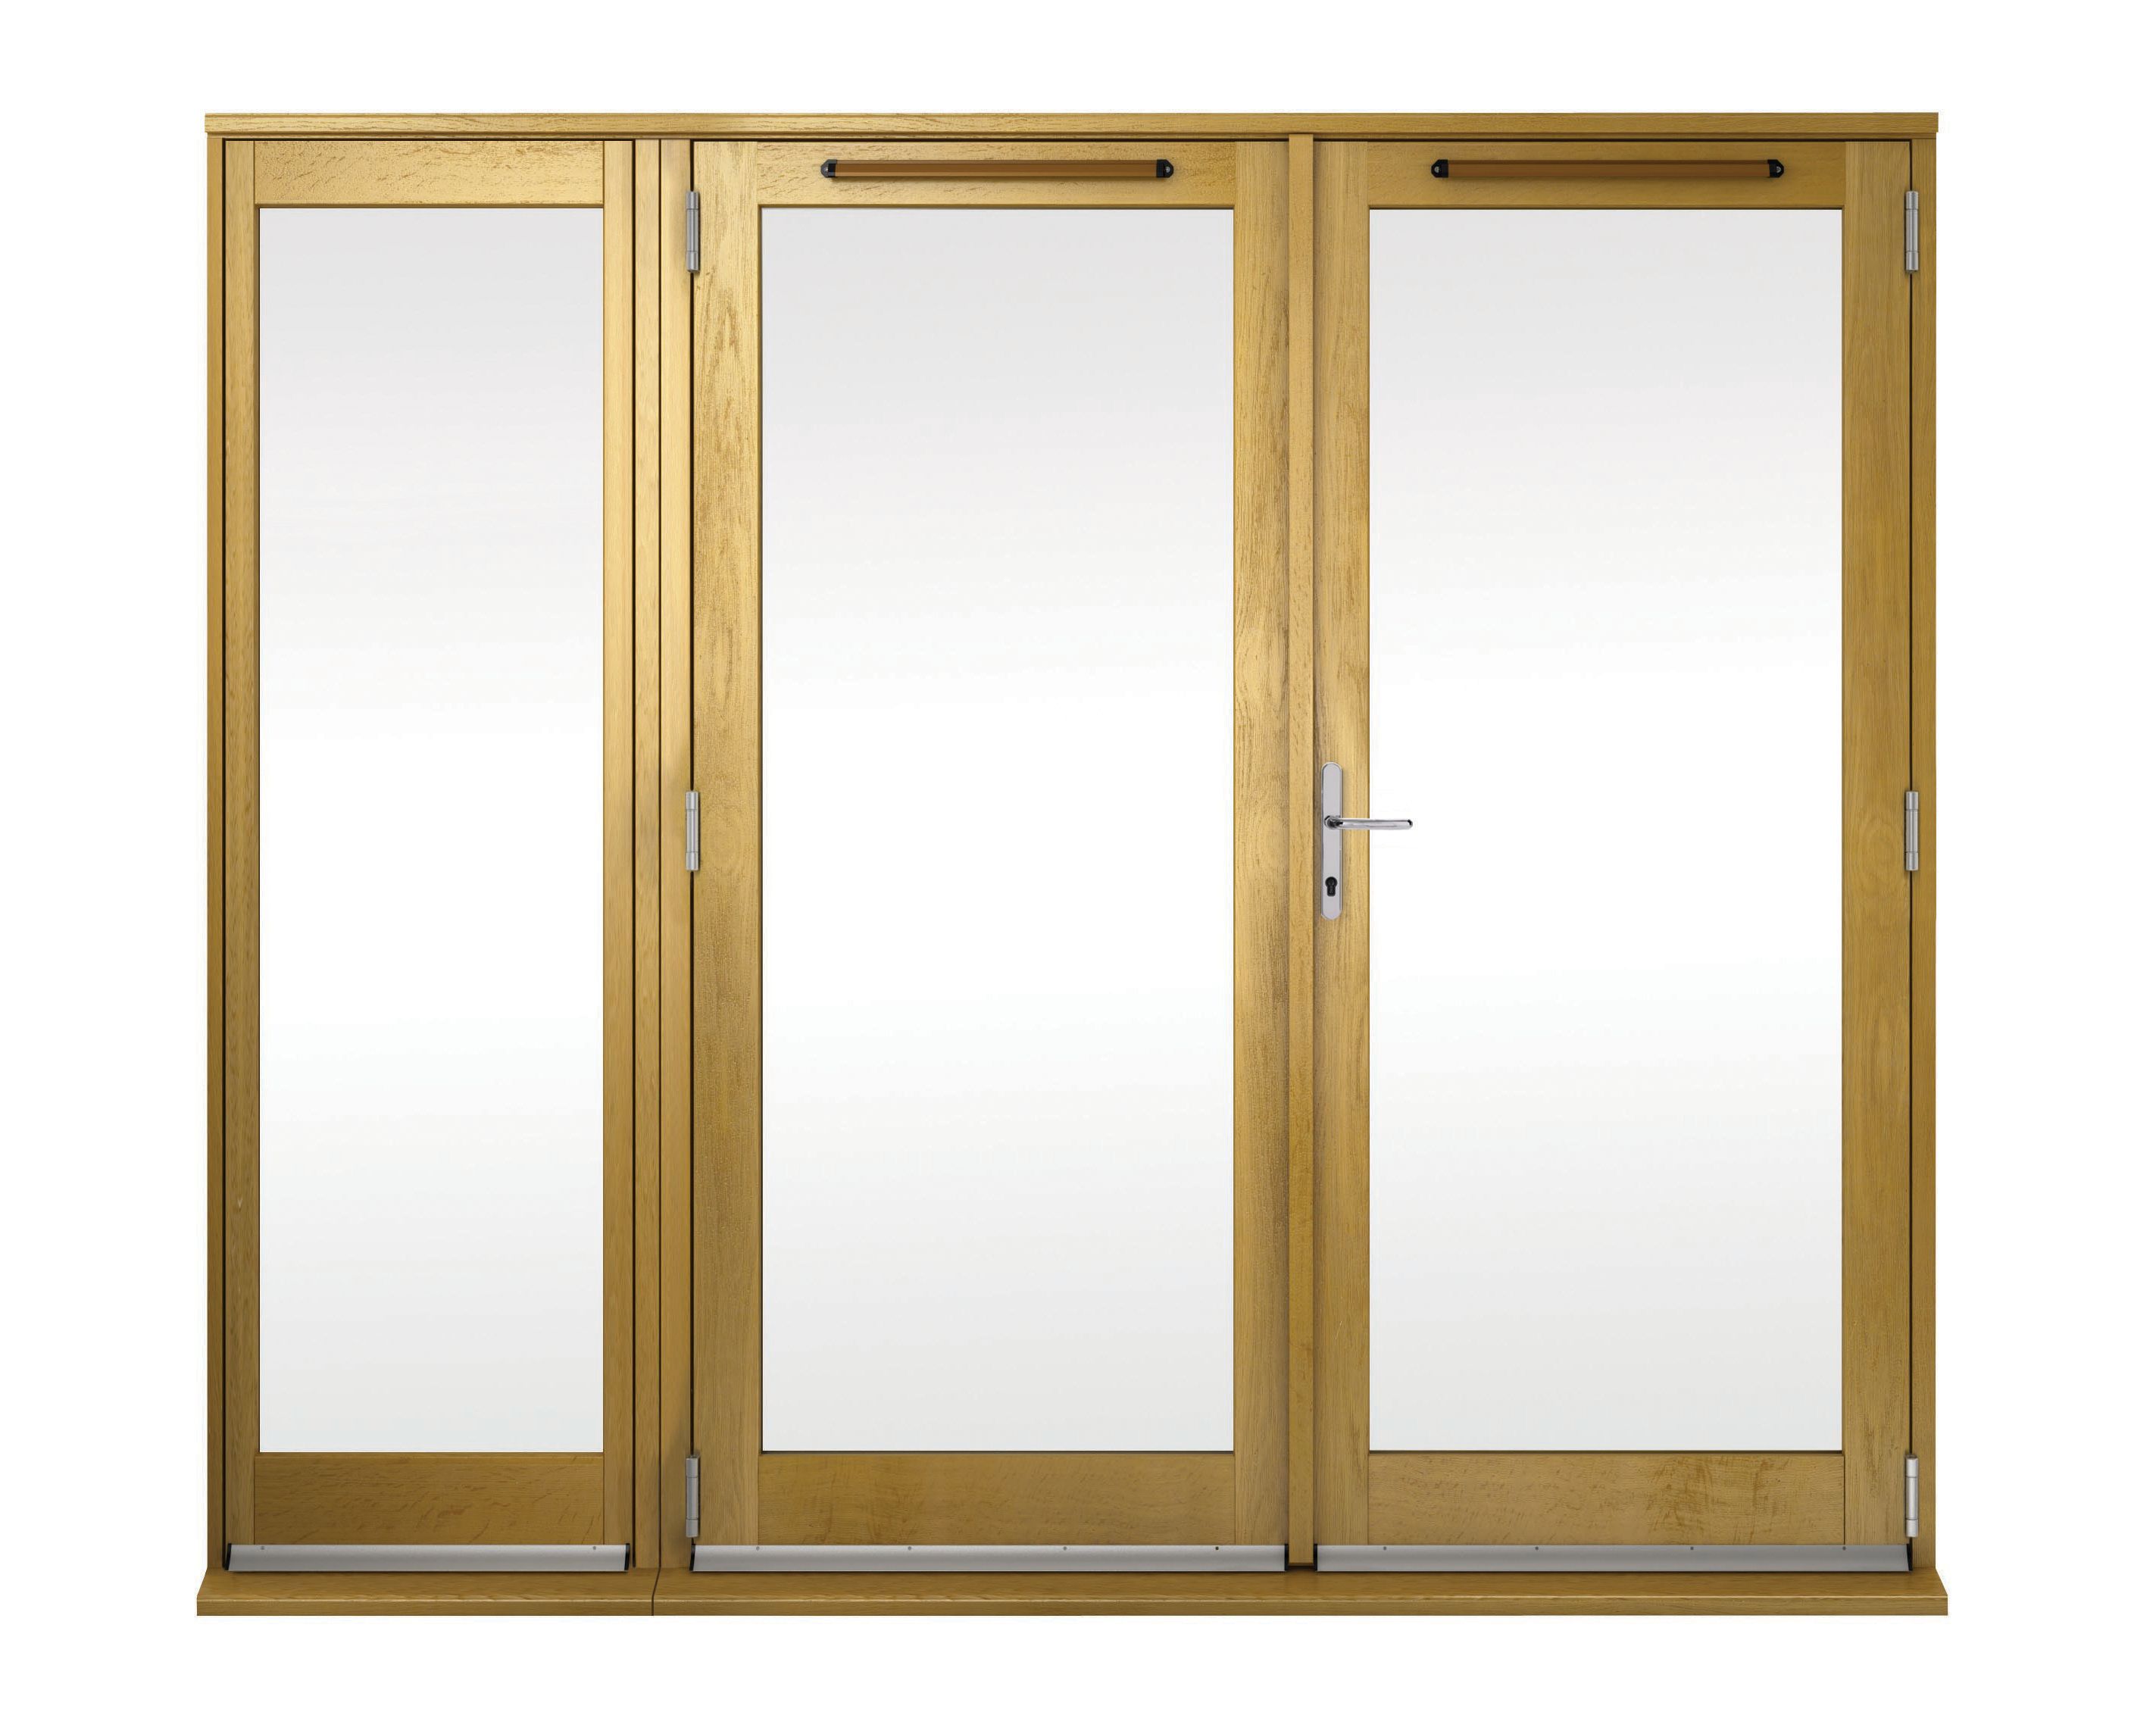 Image of Wickes Albery Pattern 10 Solid Oak Laminate French Doors 8ft with 1 Side Lite 600mm